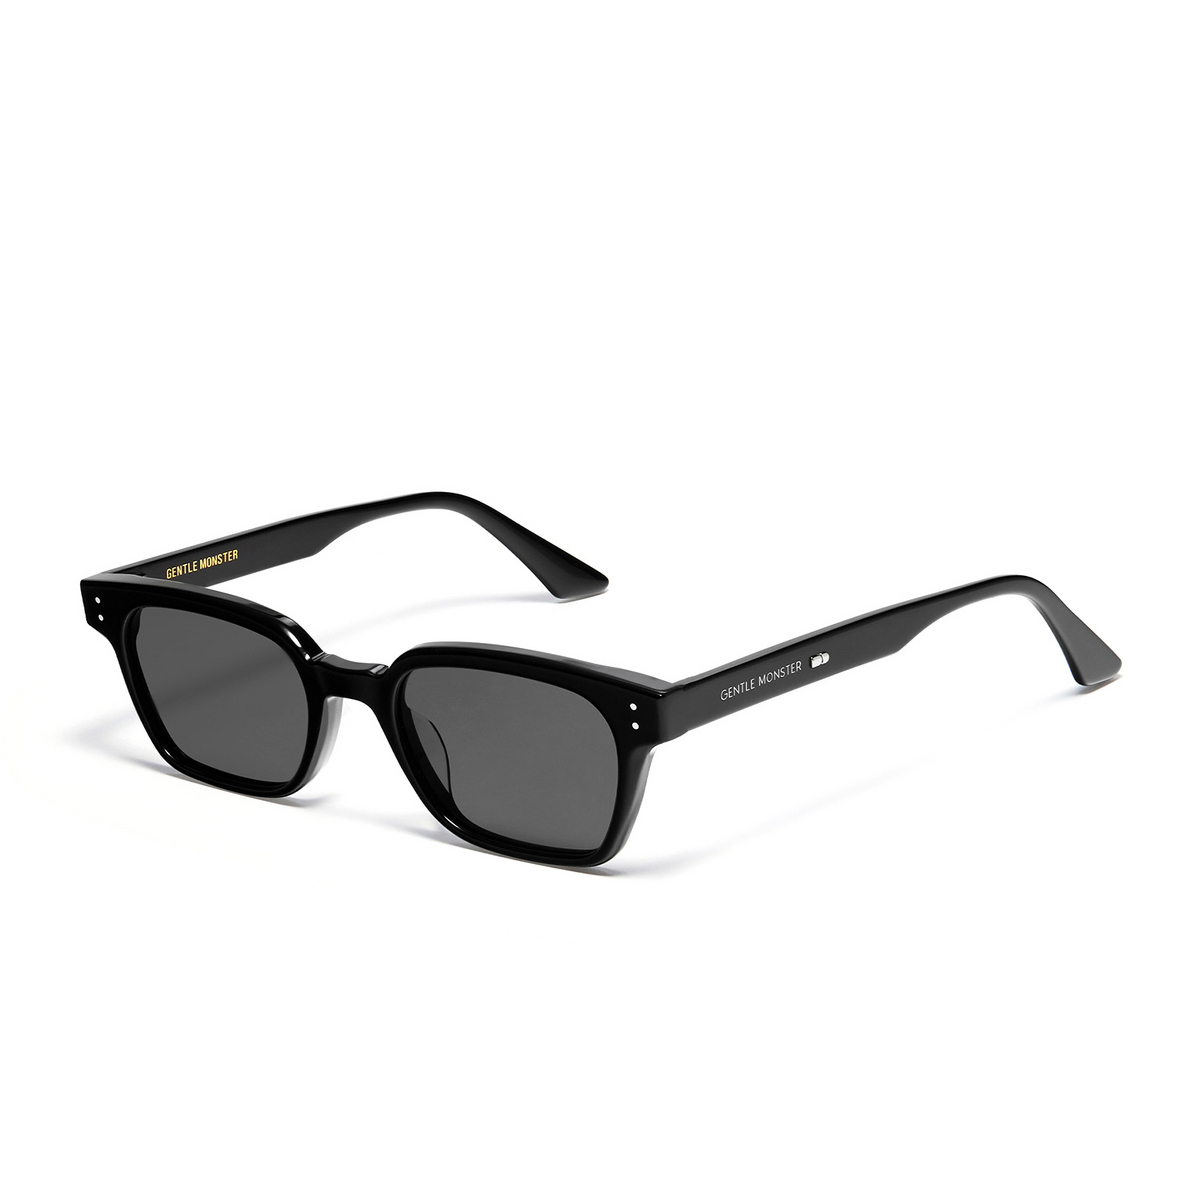 Gentle Monster® Square Sunglasses: Roudy color Black 01 - three-quarters view.